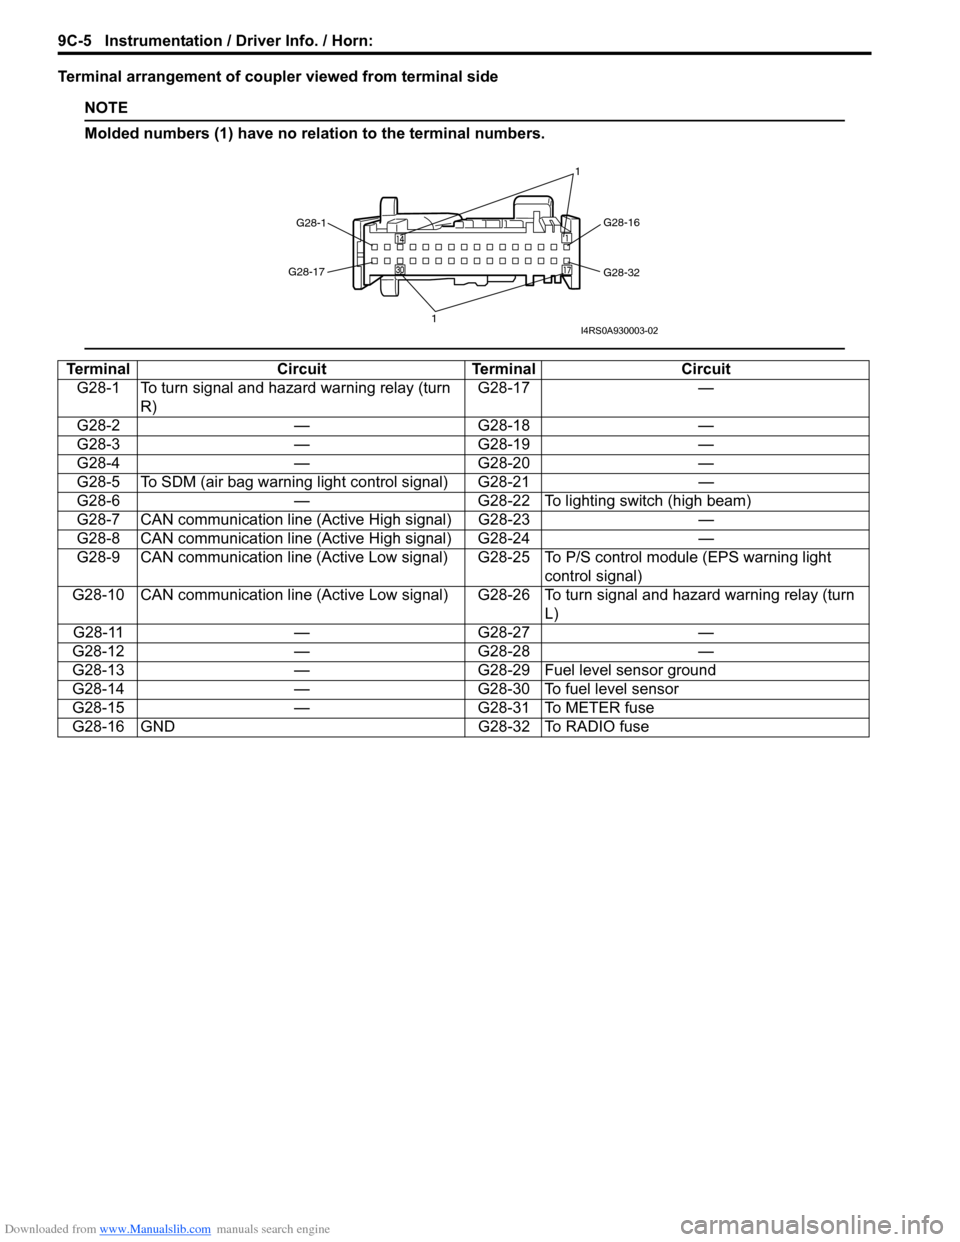 SUZUKI SWIFT 2008 2.G Service Workshop Manual Downloaded from www.Manualslib.com manuals search engine 9C-5 Instrumentation / Driver Info. / Horn: 
Terminal arrangement of coupler viewed from terminal side
NOTE
Molded numbers (1) have no relation